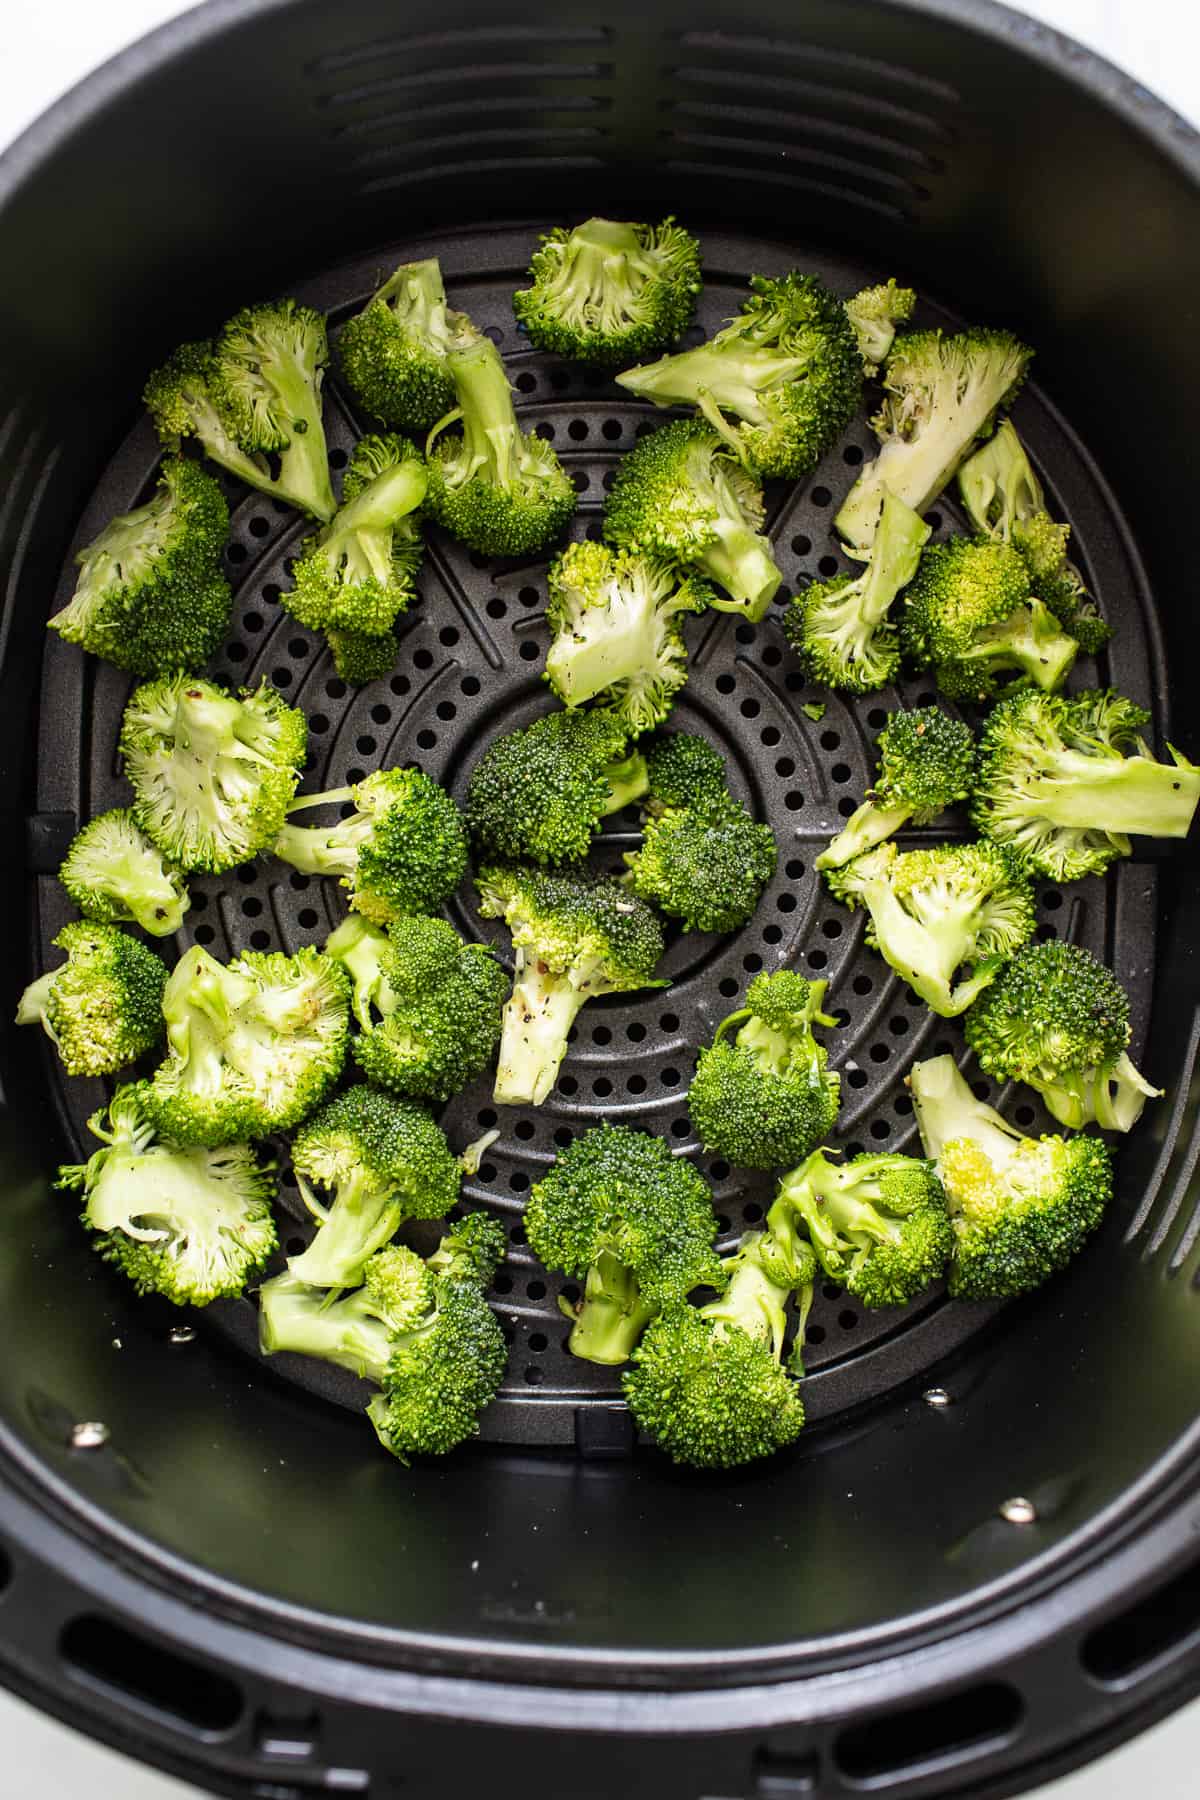 Broccoli florets in the air fryer.